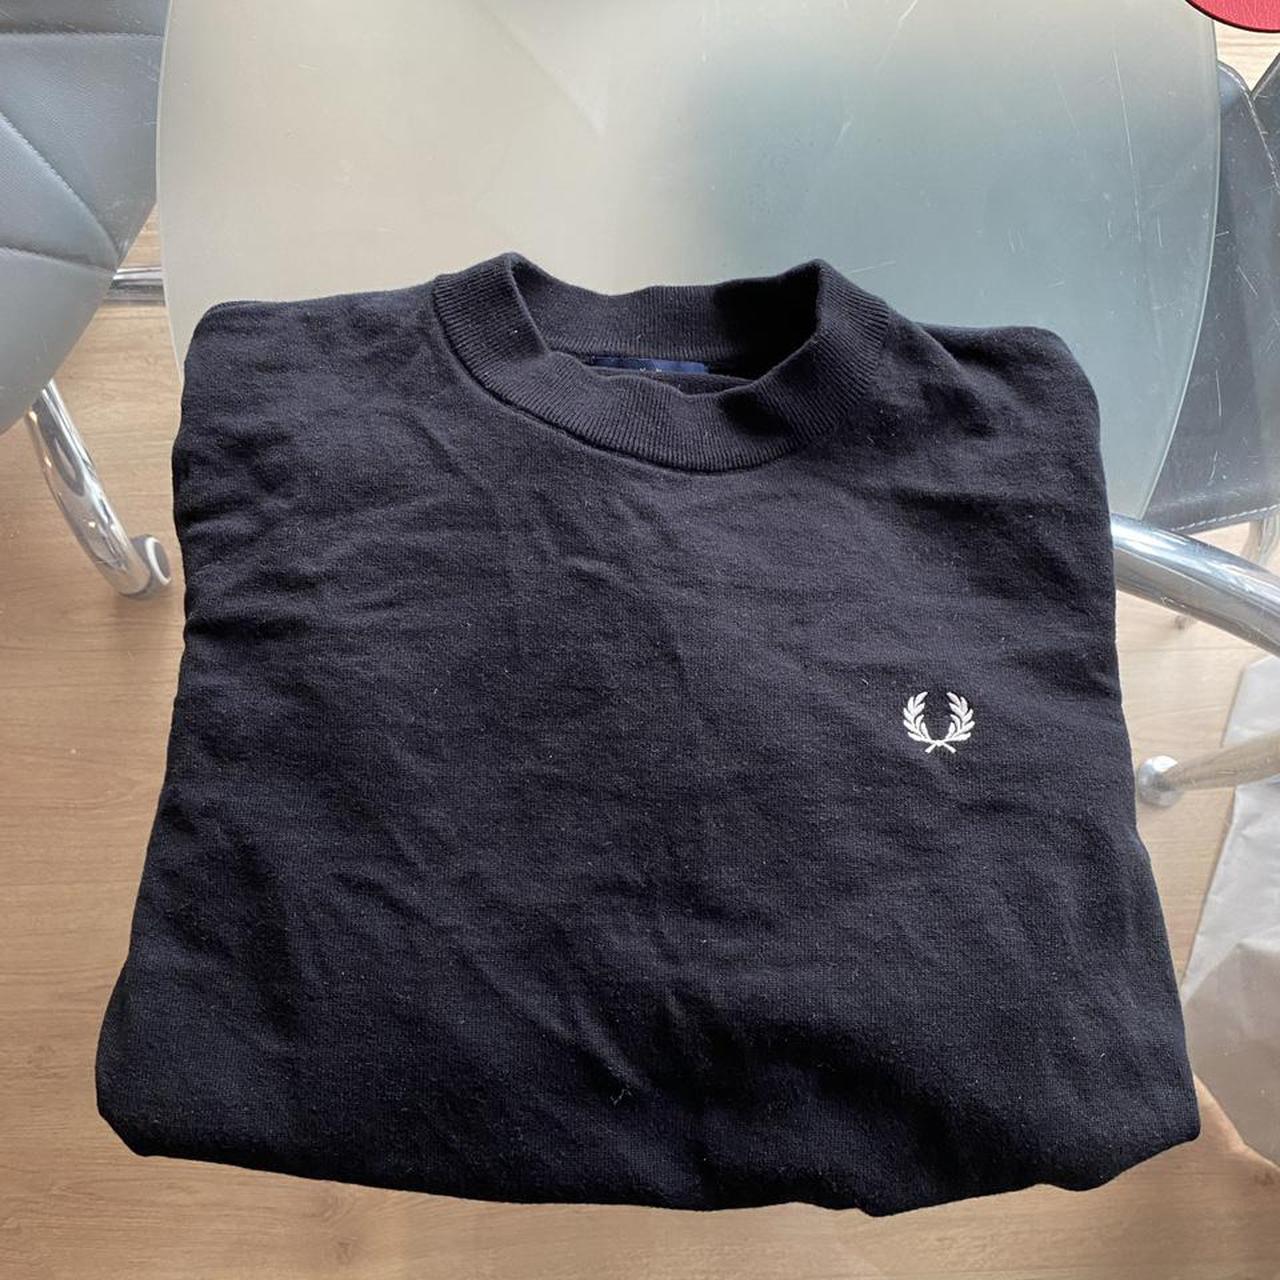 Product Image 2 - Fred Perry black and white